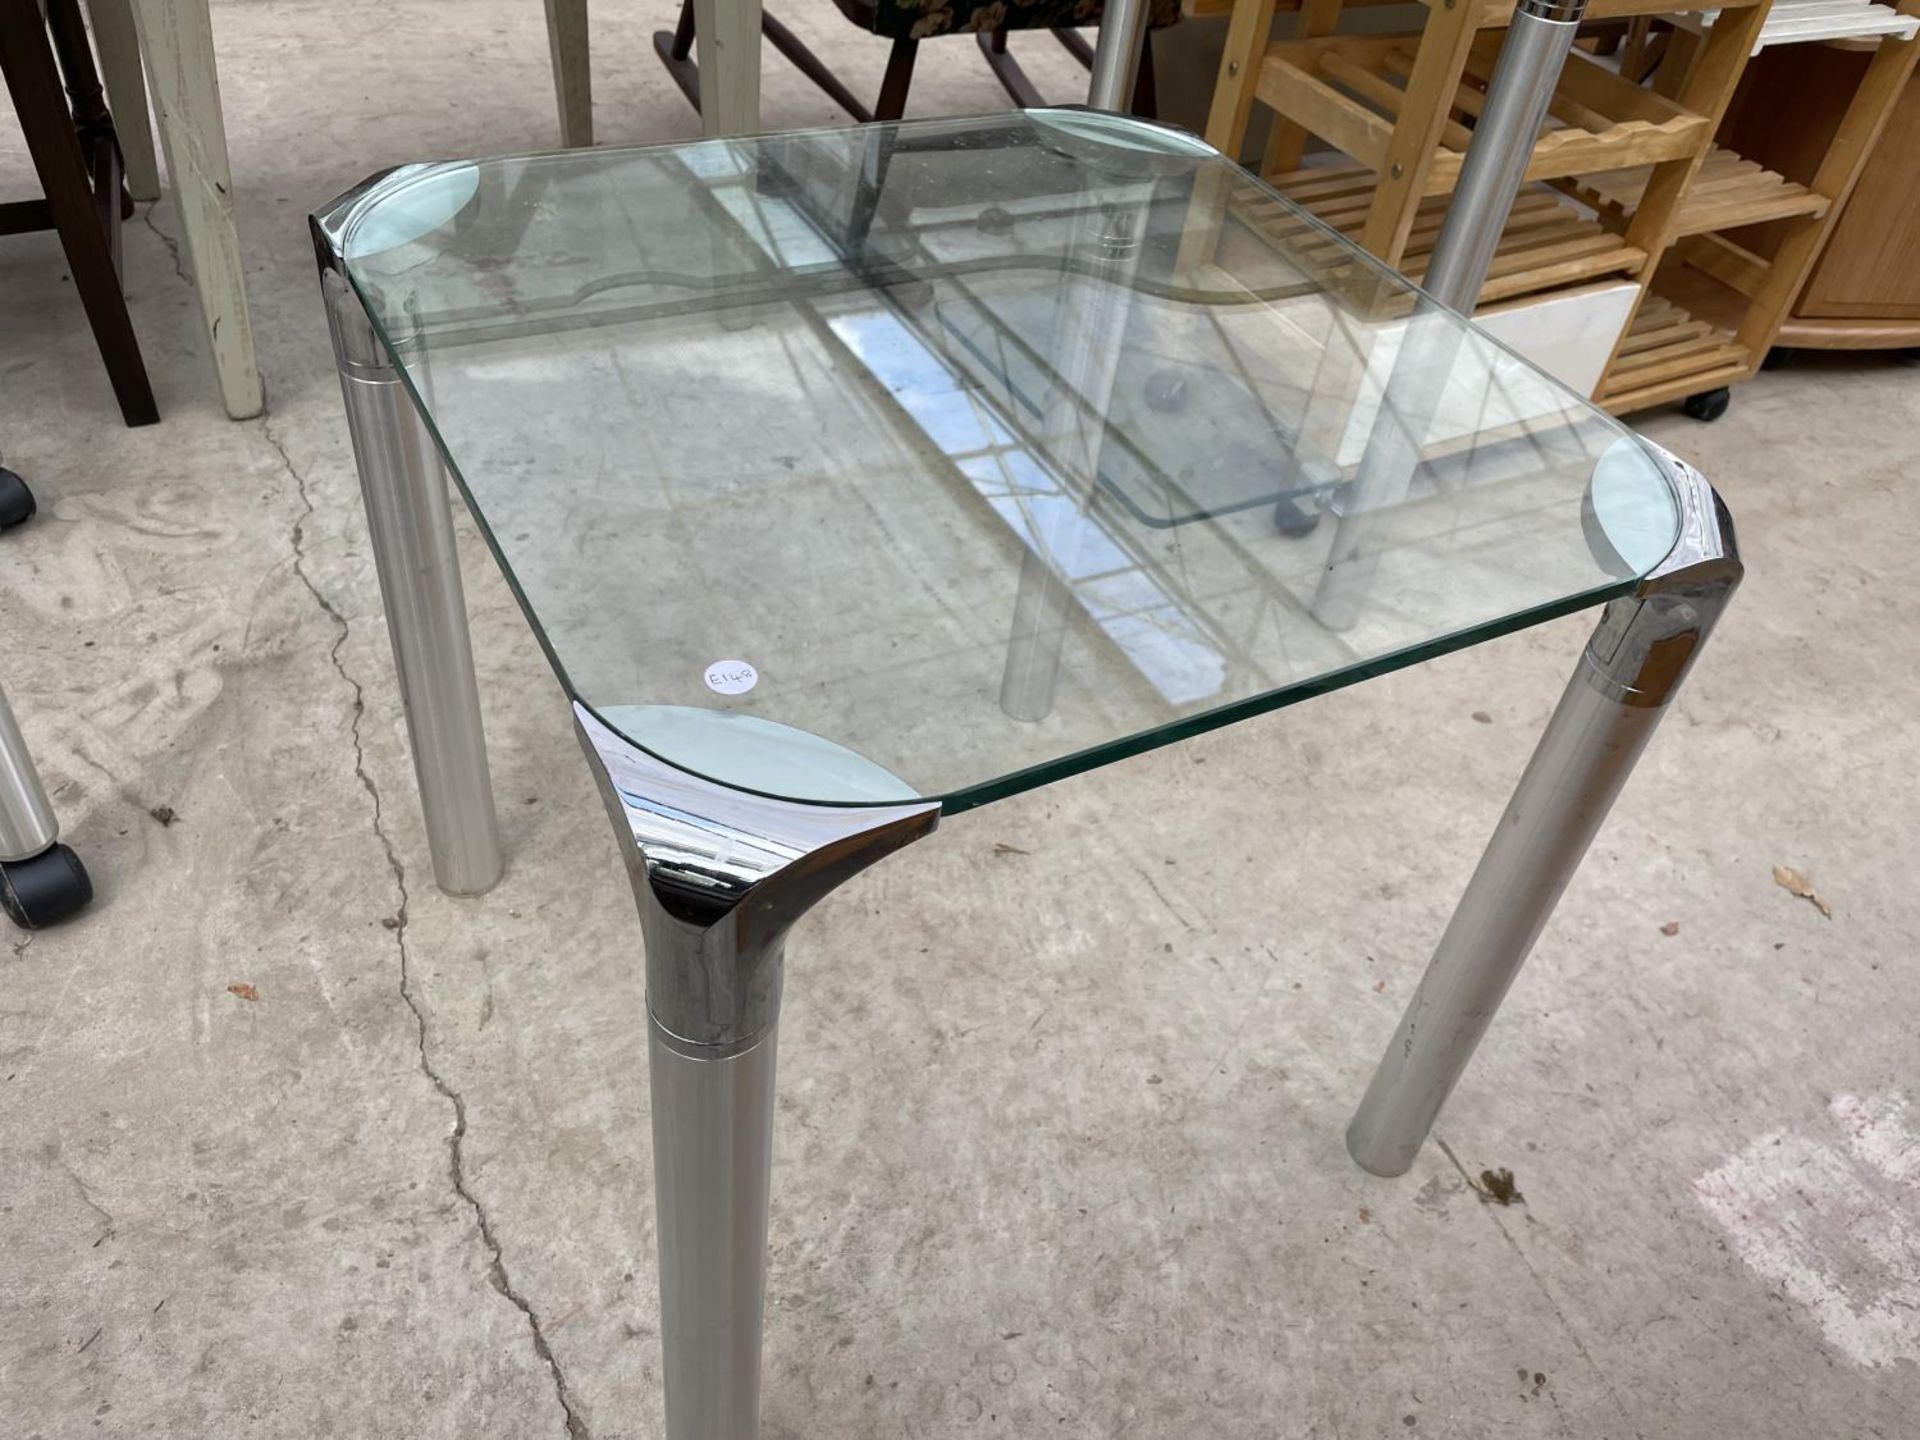 A MODERN GLASS COMPUTER TABLE AND SQUARE TABLE - Image 2 of 4